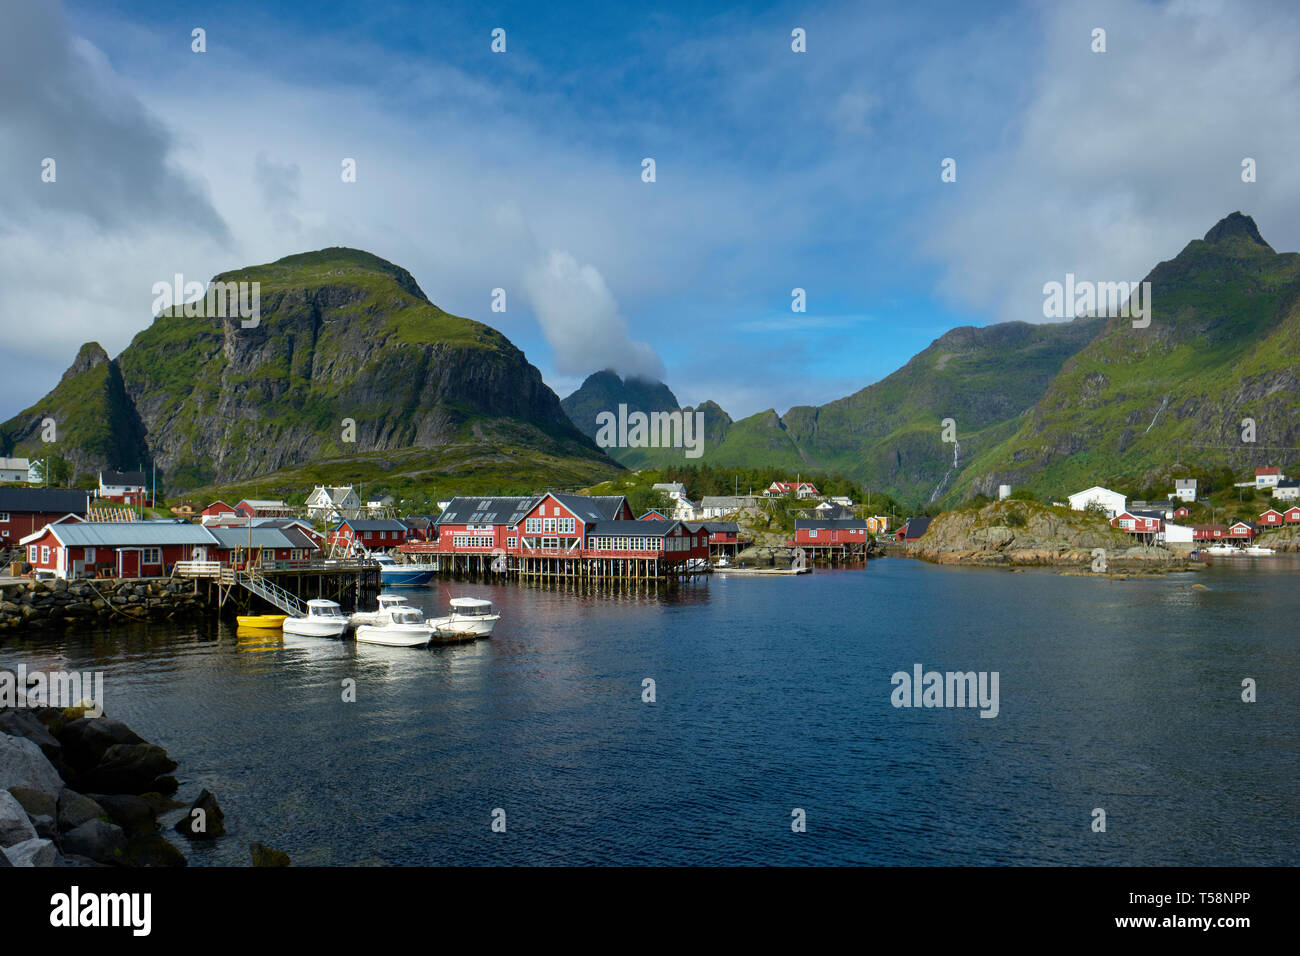 The traditional Norwegian buildings and landscape of the small fishing village and port of Å on Moskenesøya, Lofoten islands Norway Stock Photo